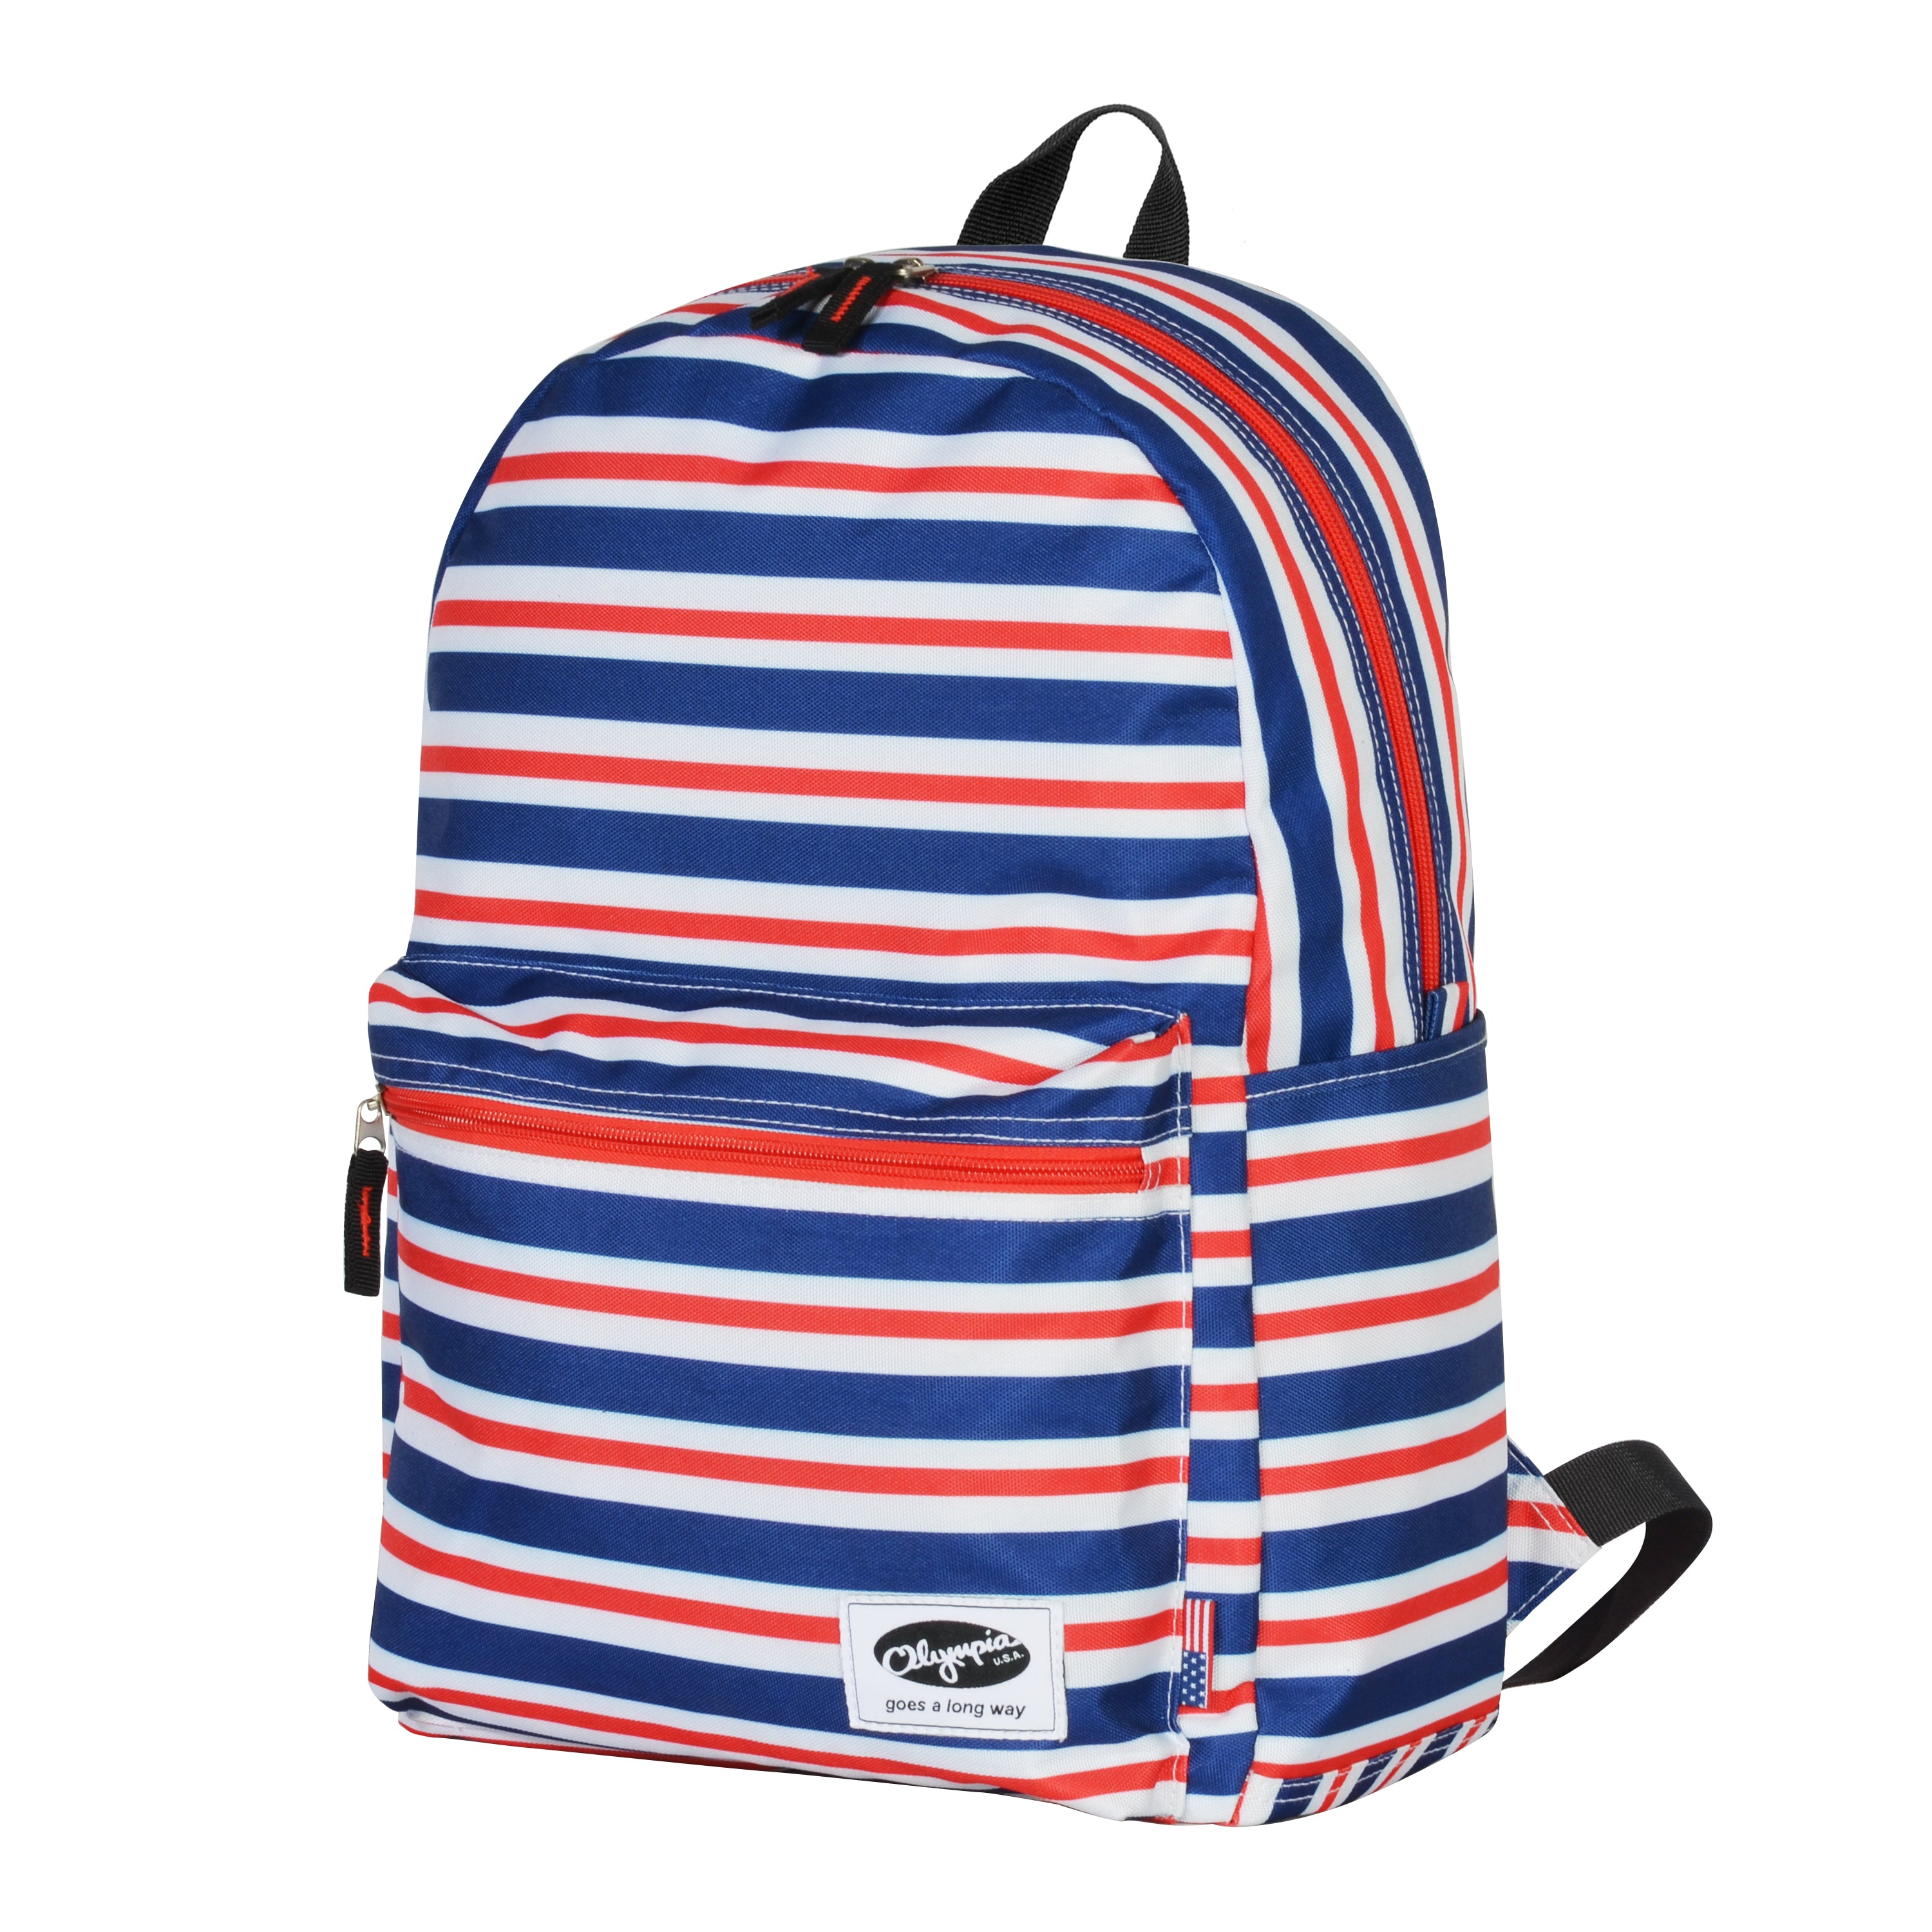 Cornell Authentic water resistant supreme printed Backpack with Laptop compartment